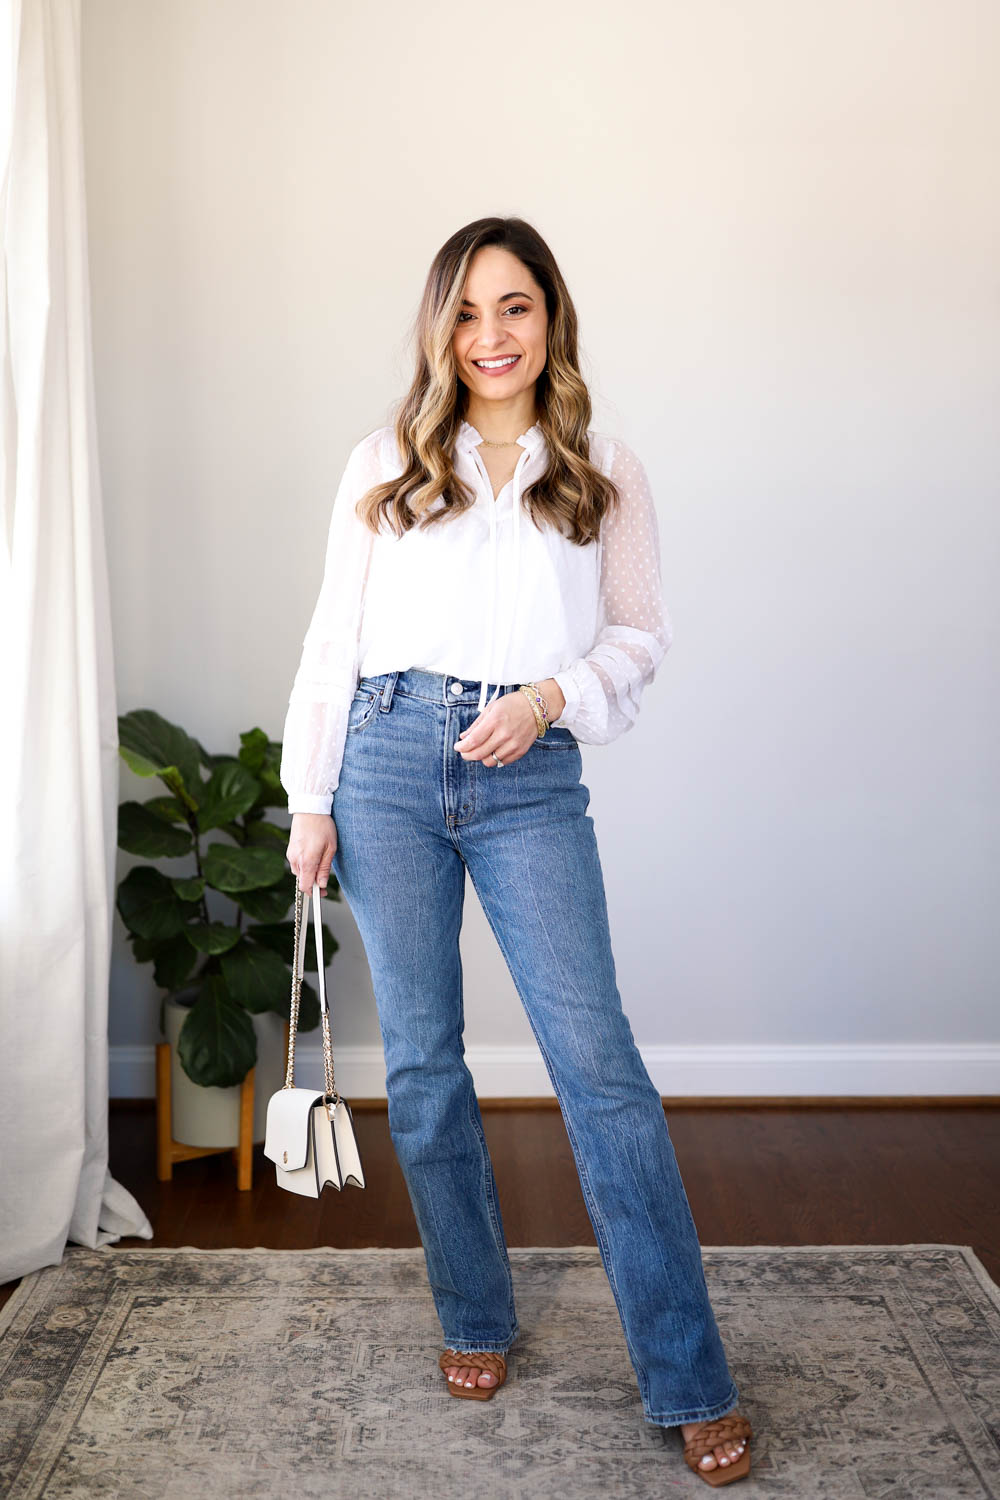 Flare Sleeves, Flare Trousers - Extra Petite